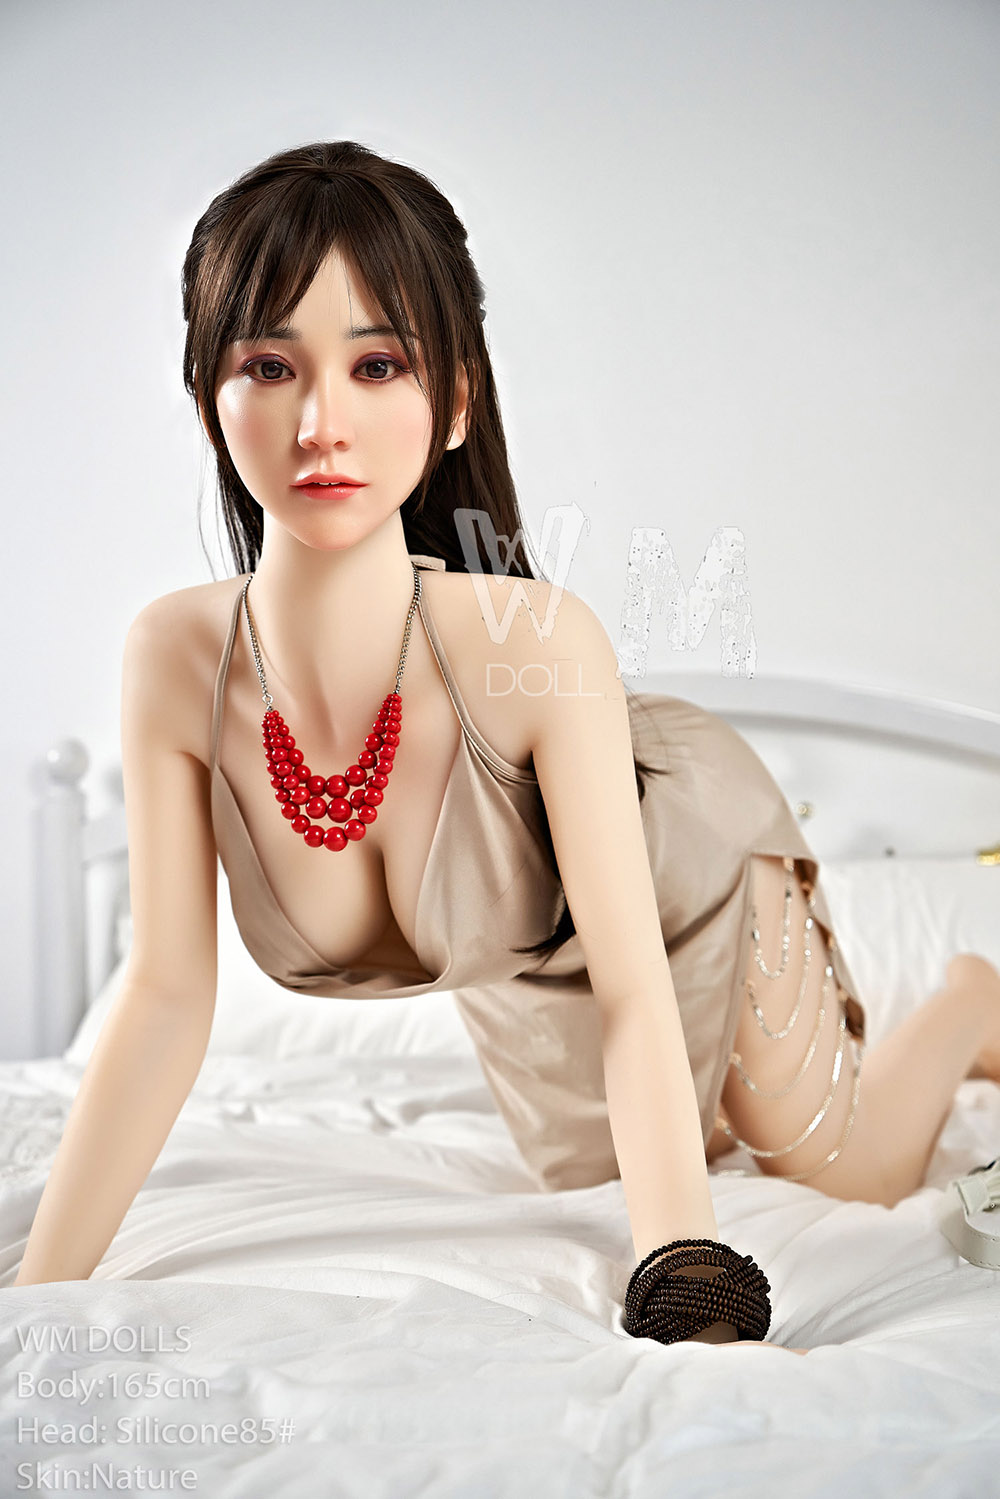  married woman sex doll